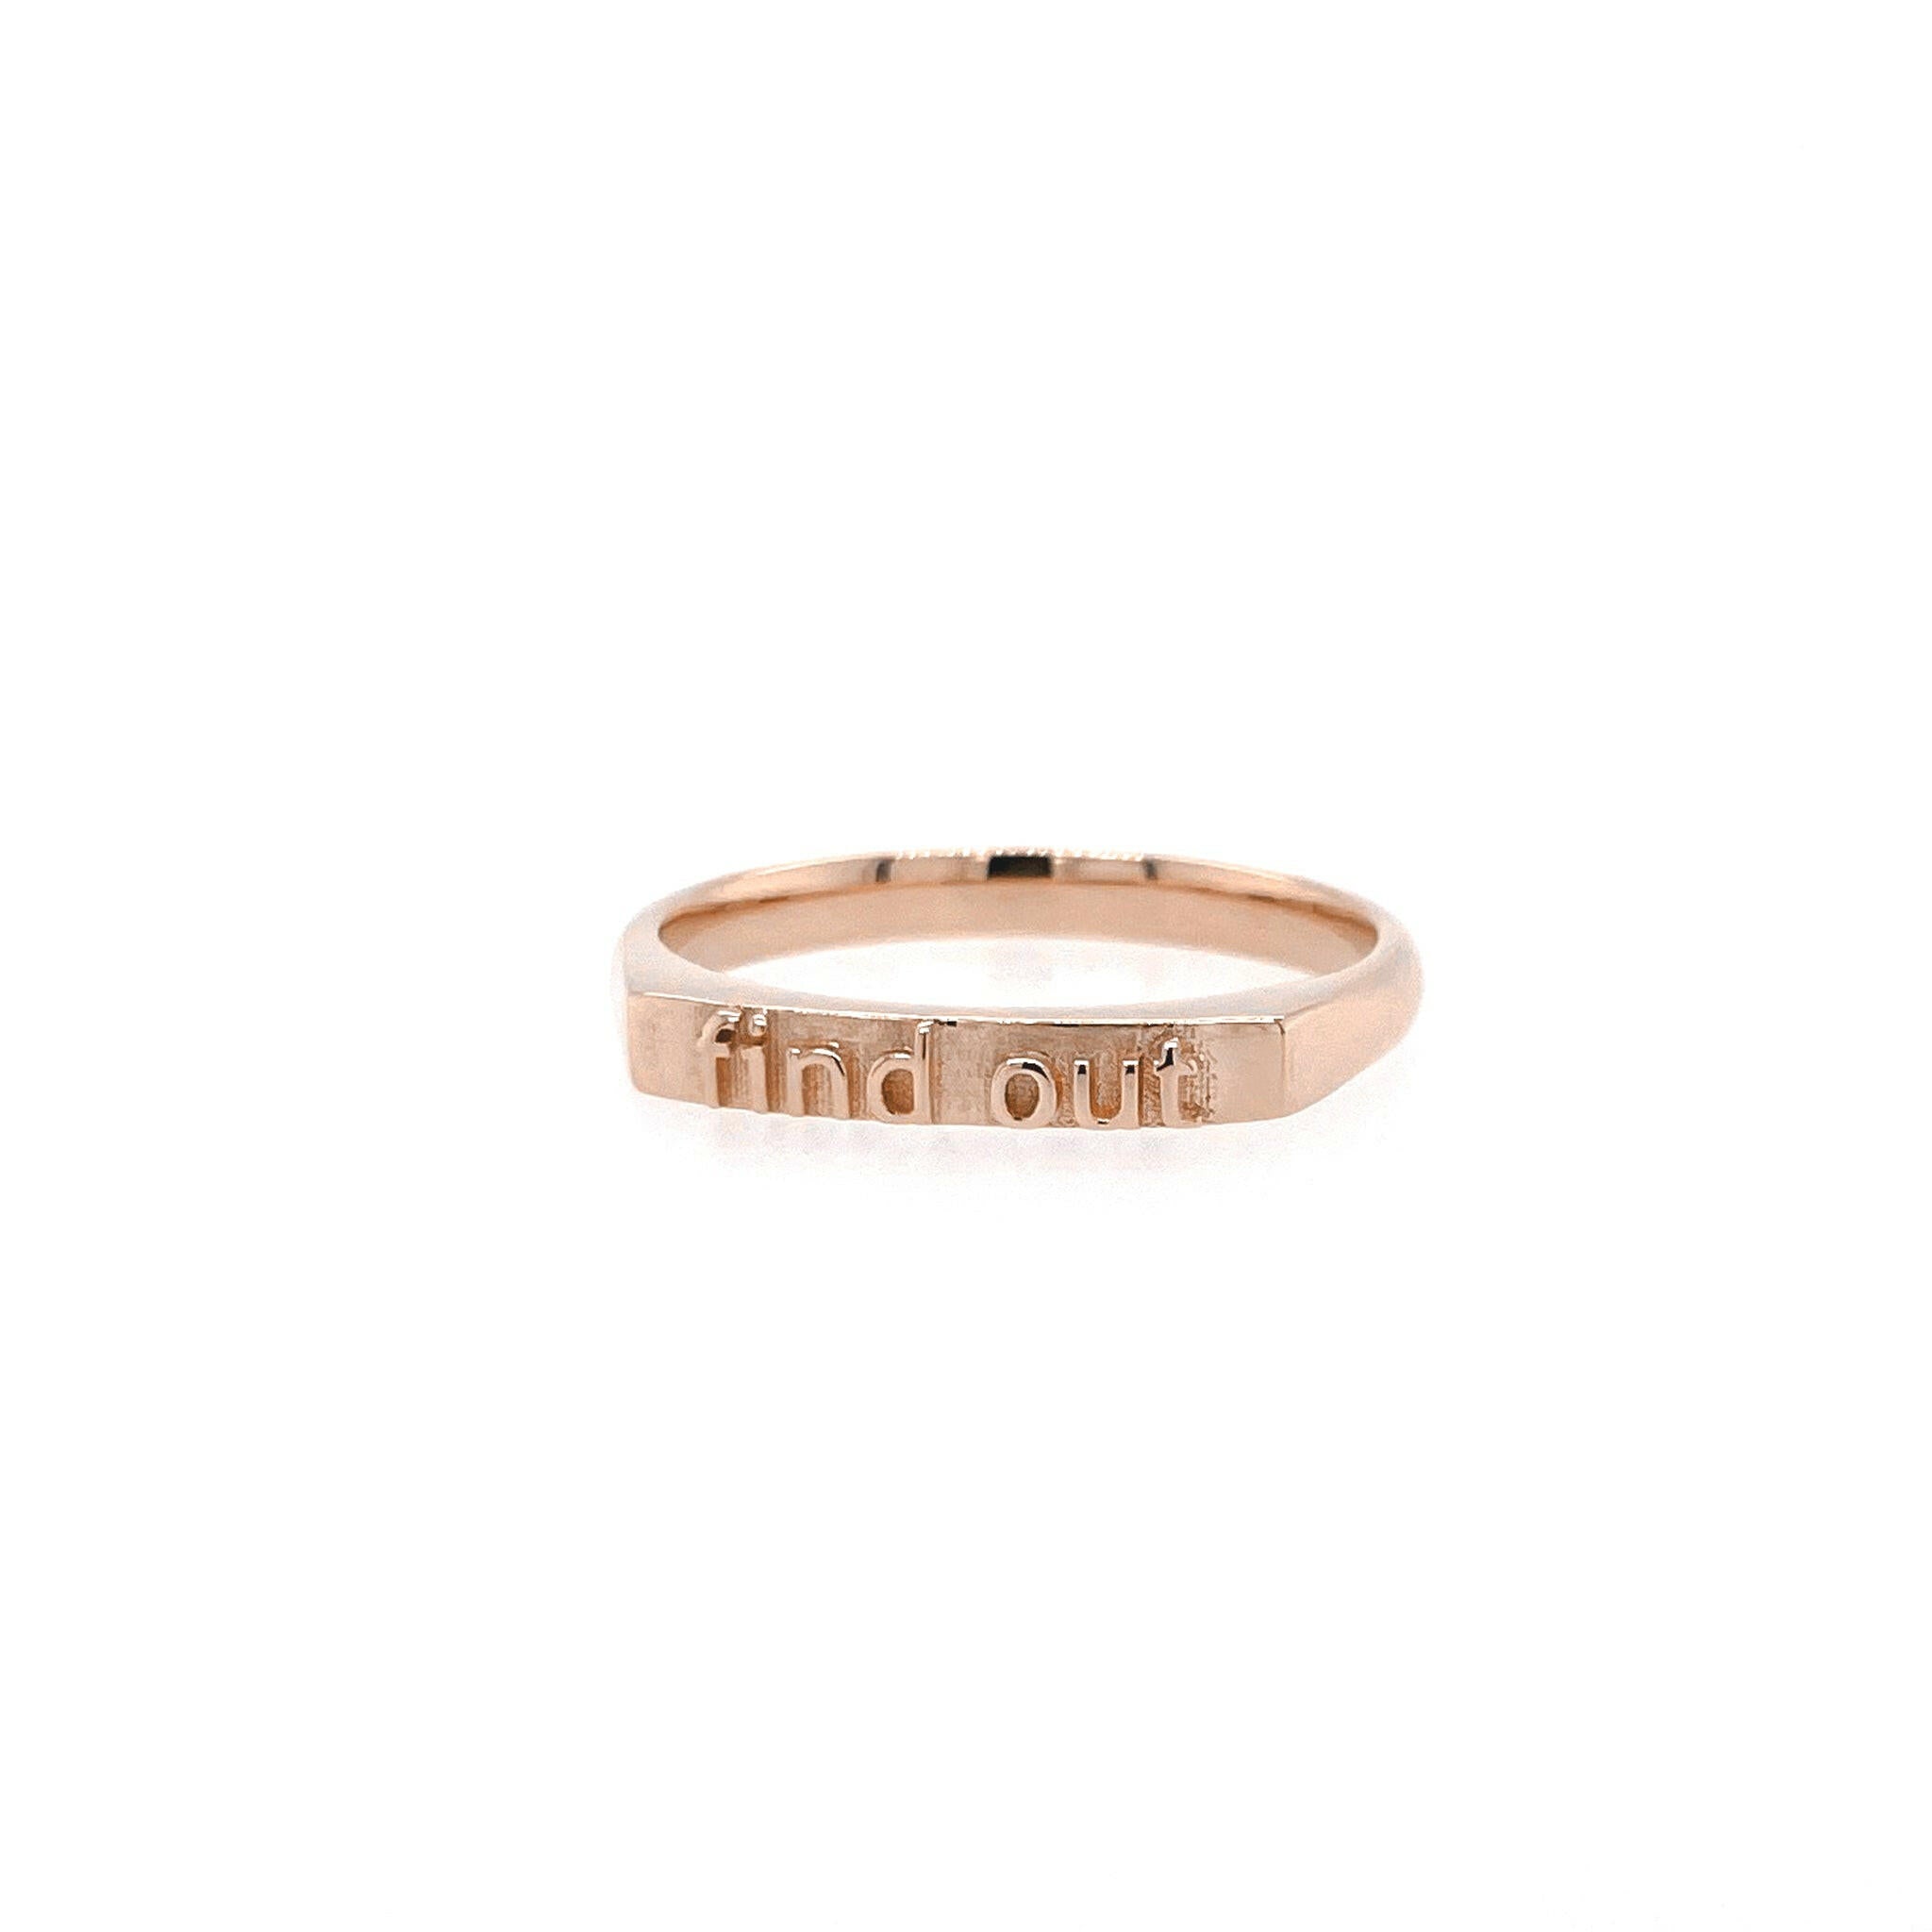 slightly right angled 14 Karat rose gold ring with text that reads "find out"